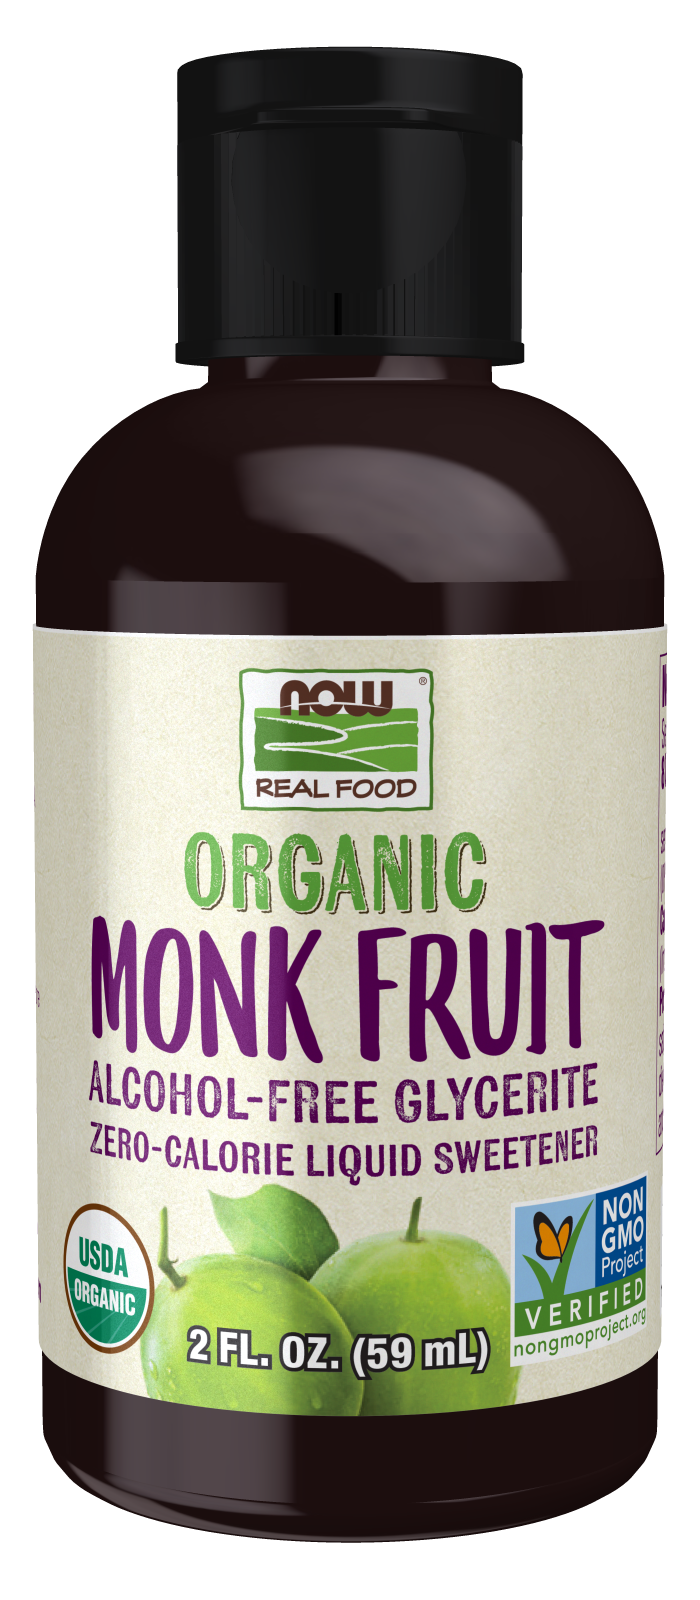 What Is Monk Fruit?